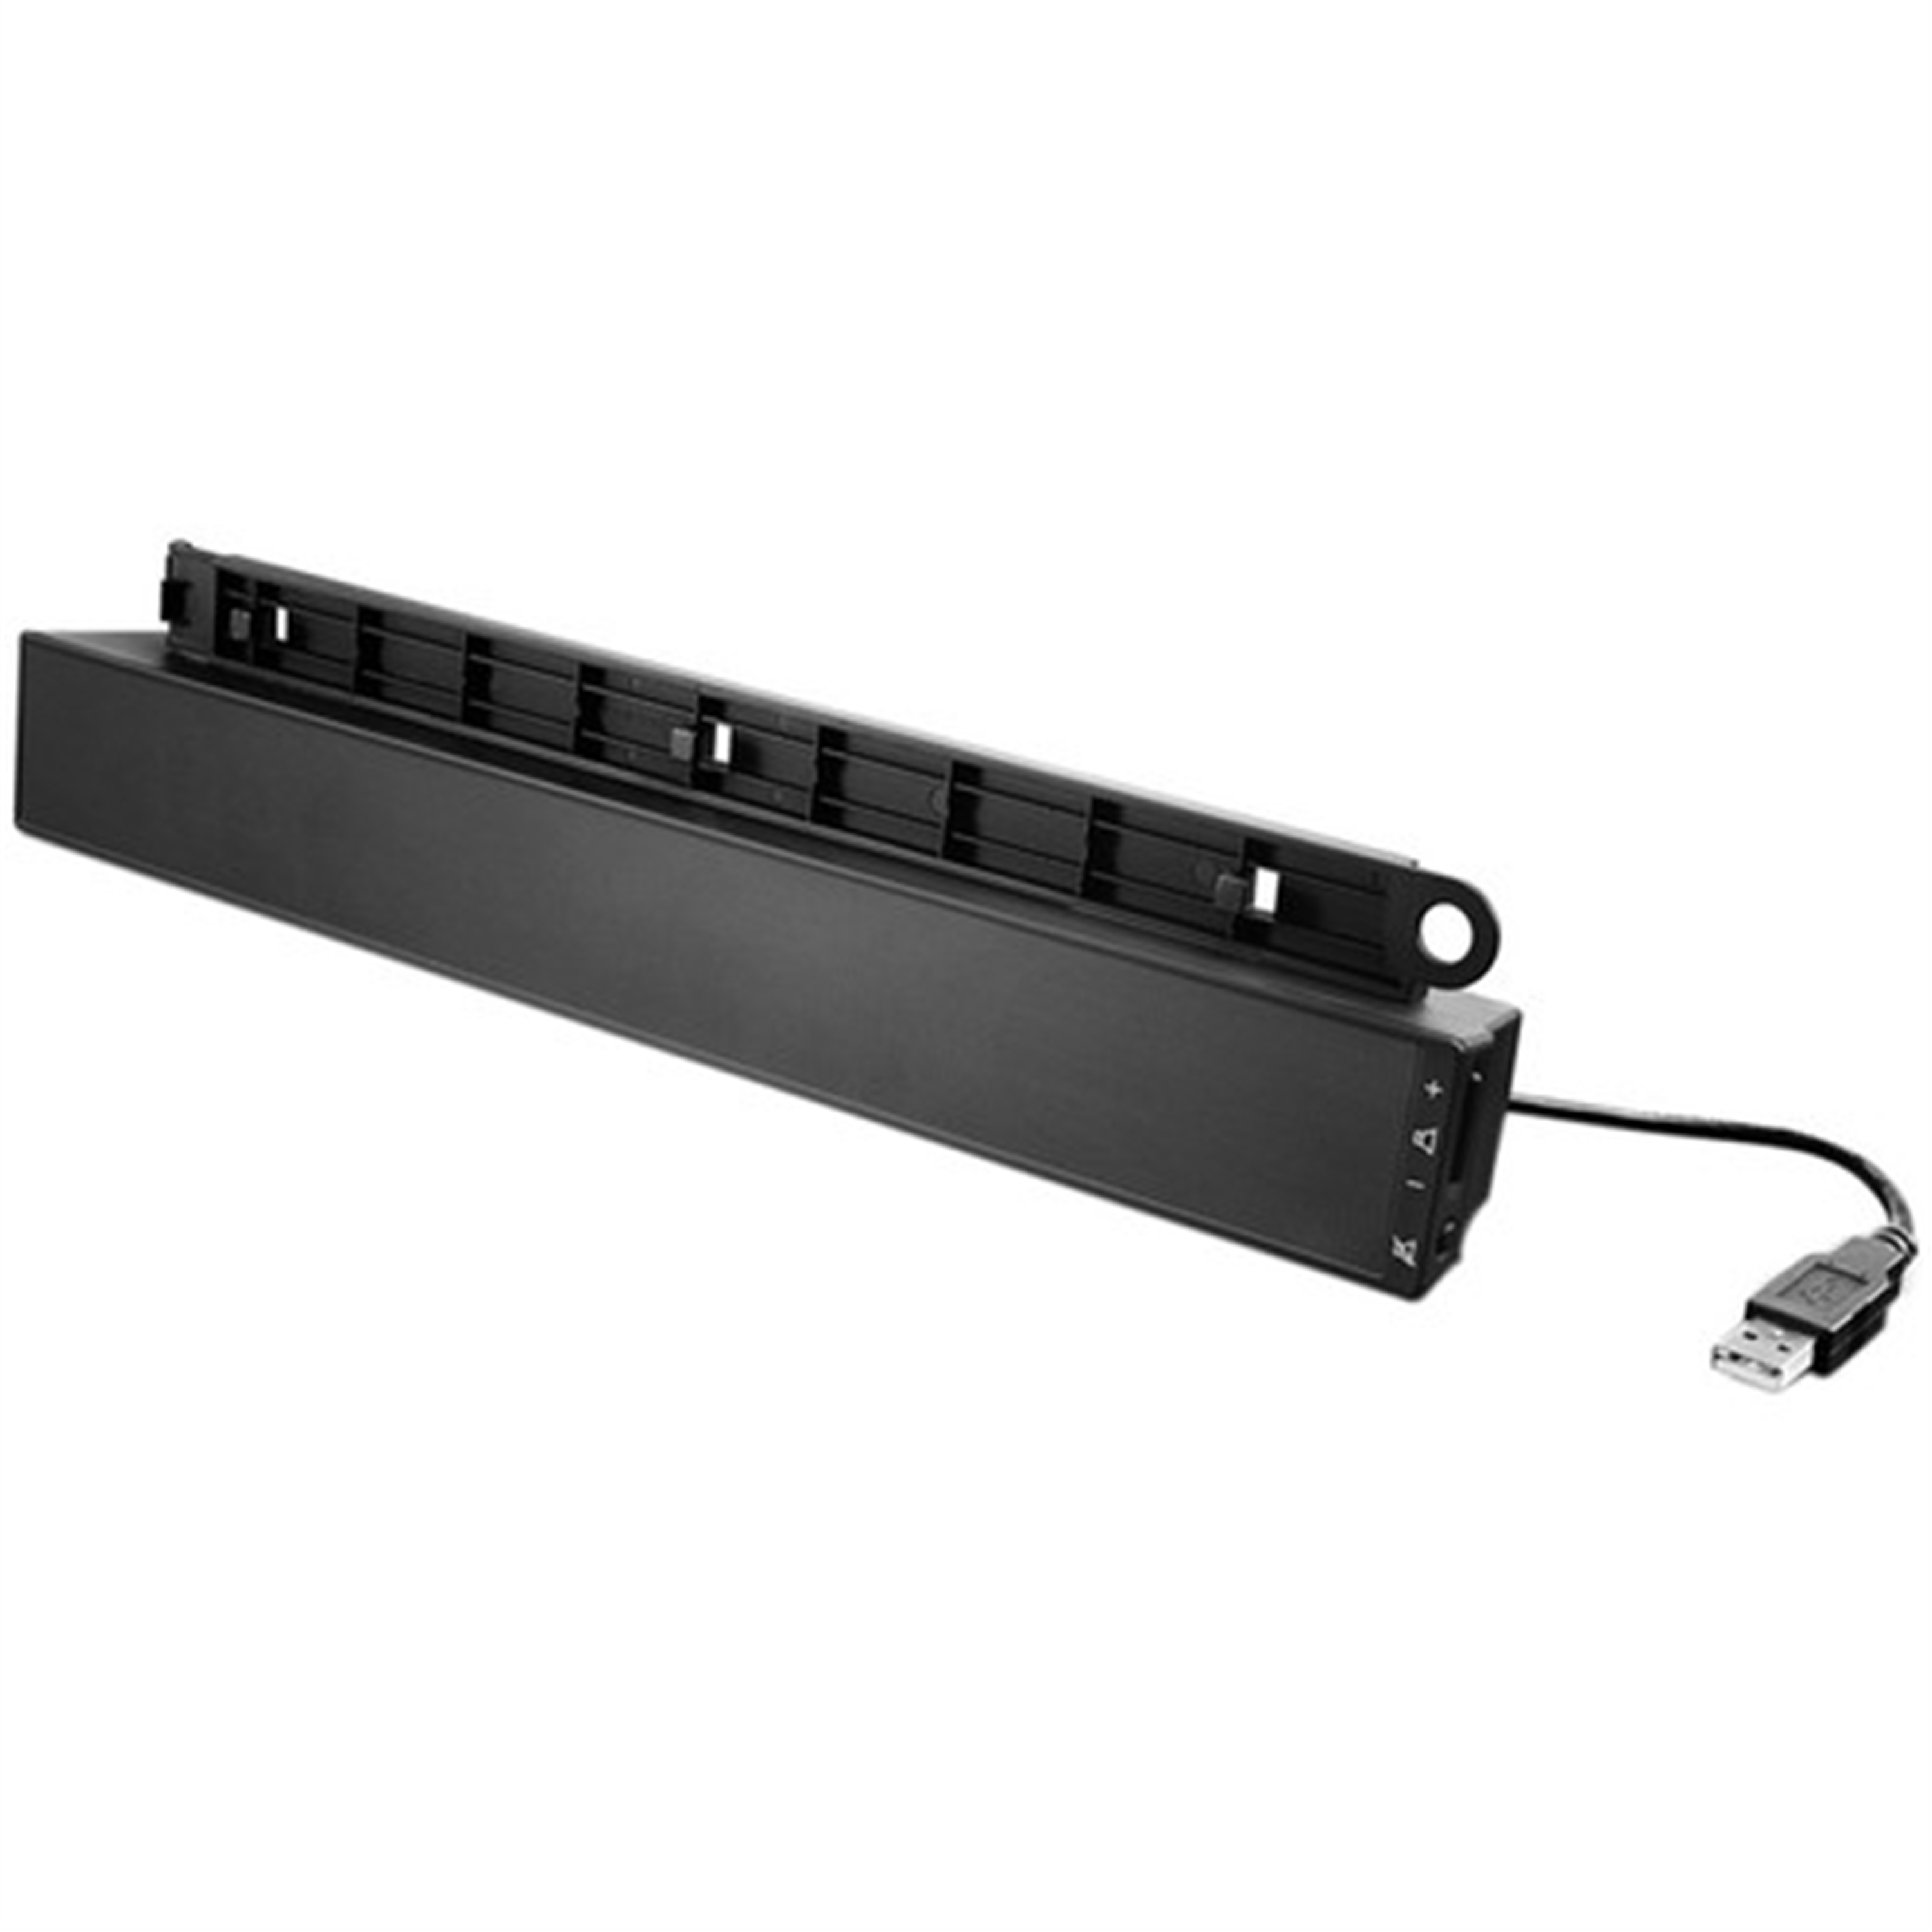 Lenovo 0A36190 2.0 Channel Home Theater Sound Bar, Black (Scratch And Dent Used) - image 1 of 3